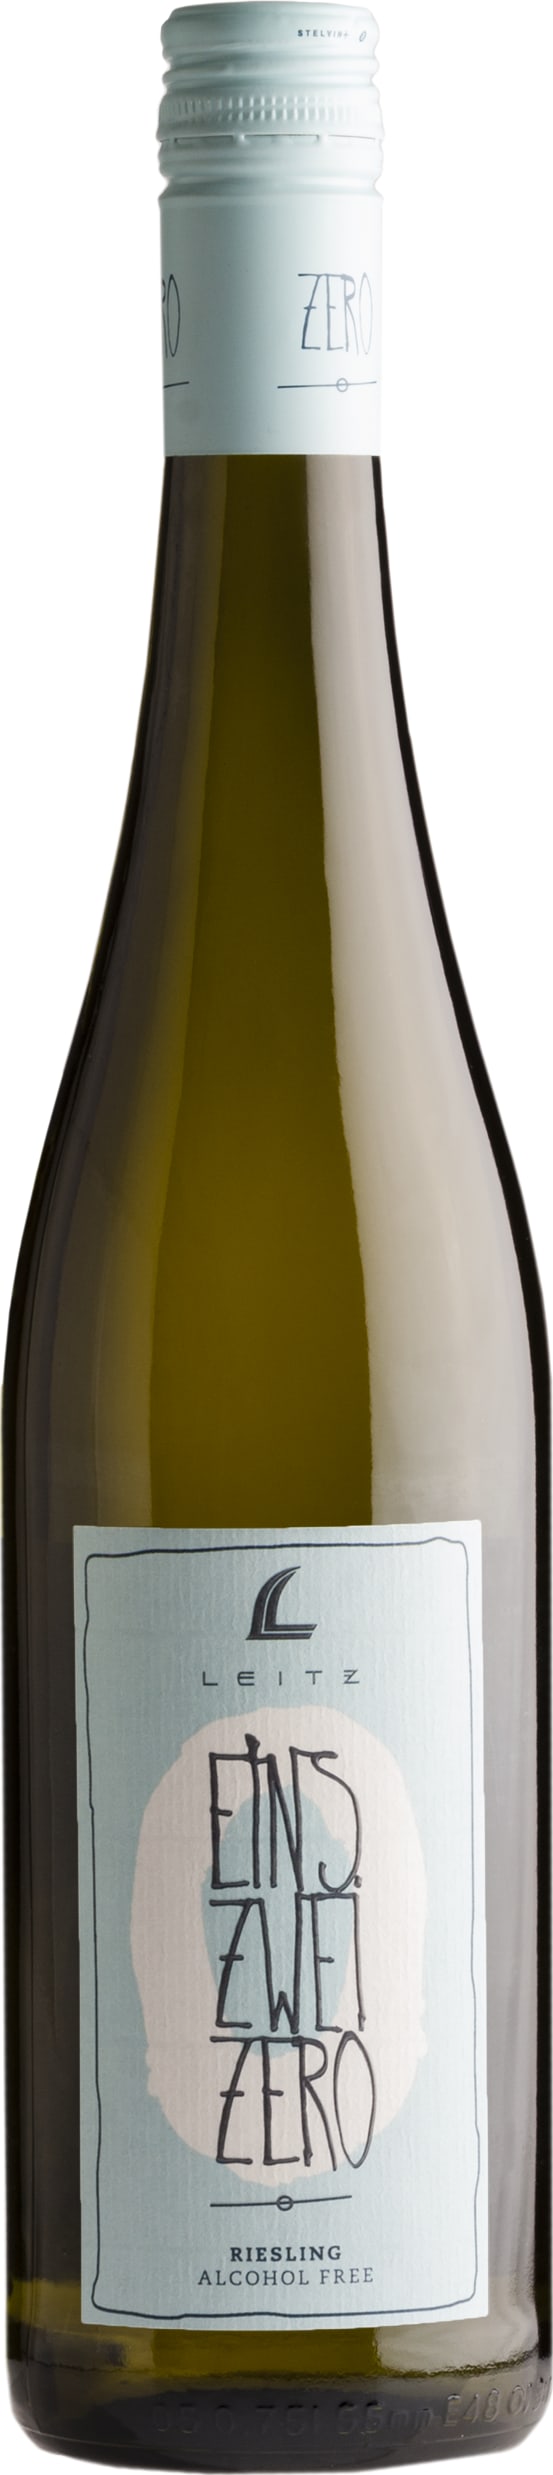 JJ Leitz Eins Zwei Zero Riesling (Alcohol Free) 75cl NV - Buy JJ Leitz Wines from GREAT WINES DIRECT wine shop